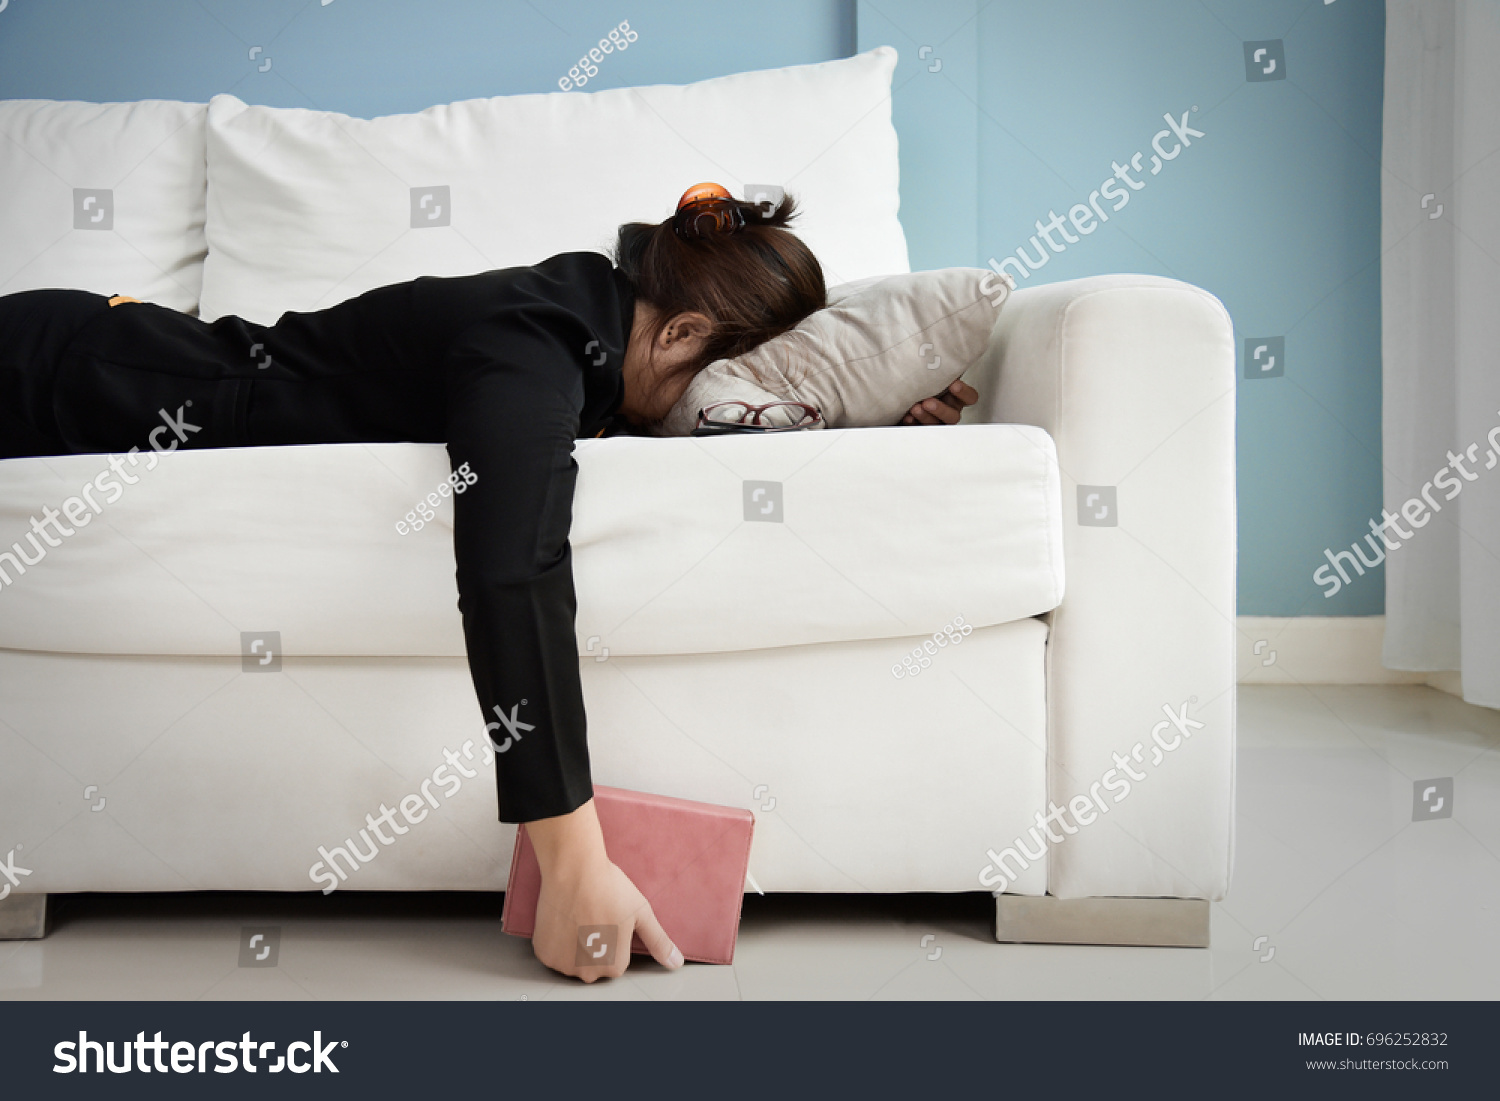 Exhausted, Tired, Lazy, sleepy Asian Business woman in black suit lying on white sofa with blue wall and copy space. Stress from overtime working concept. #696252832